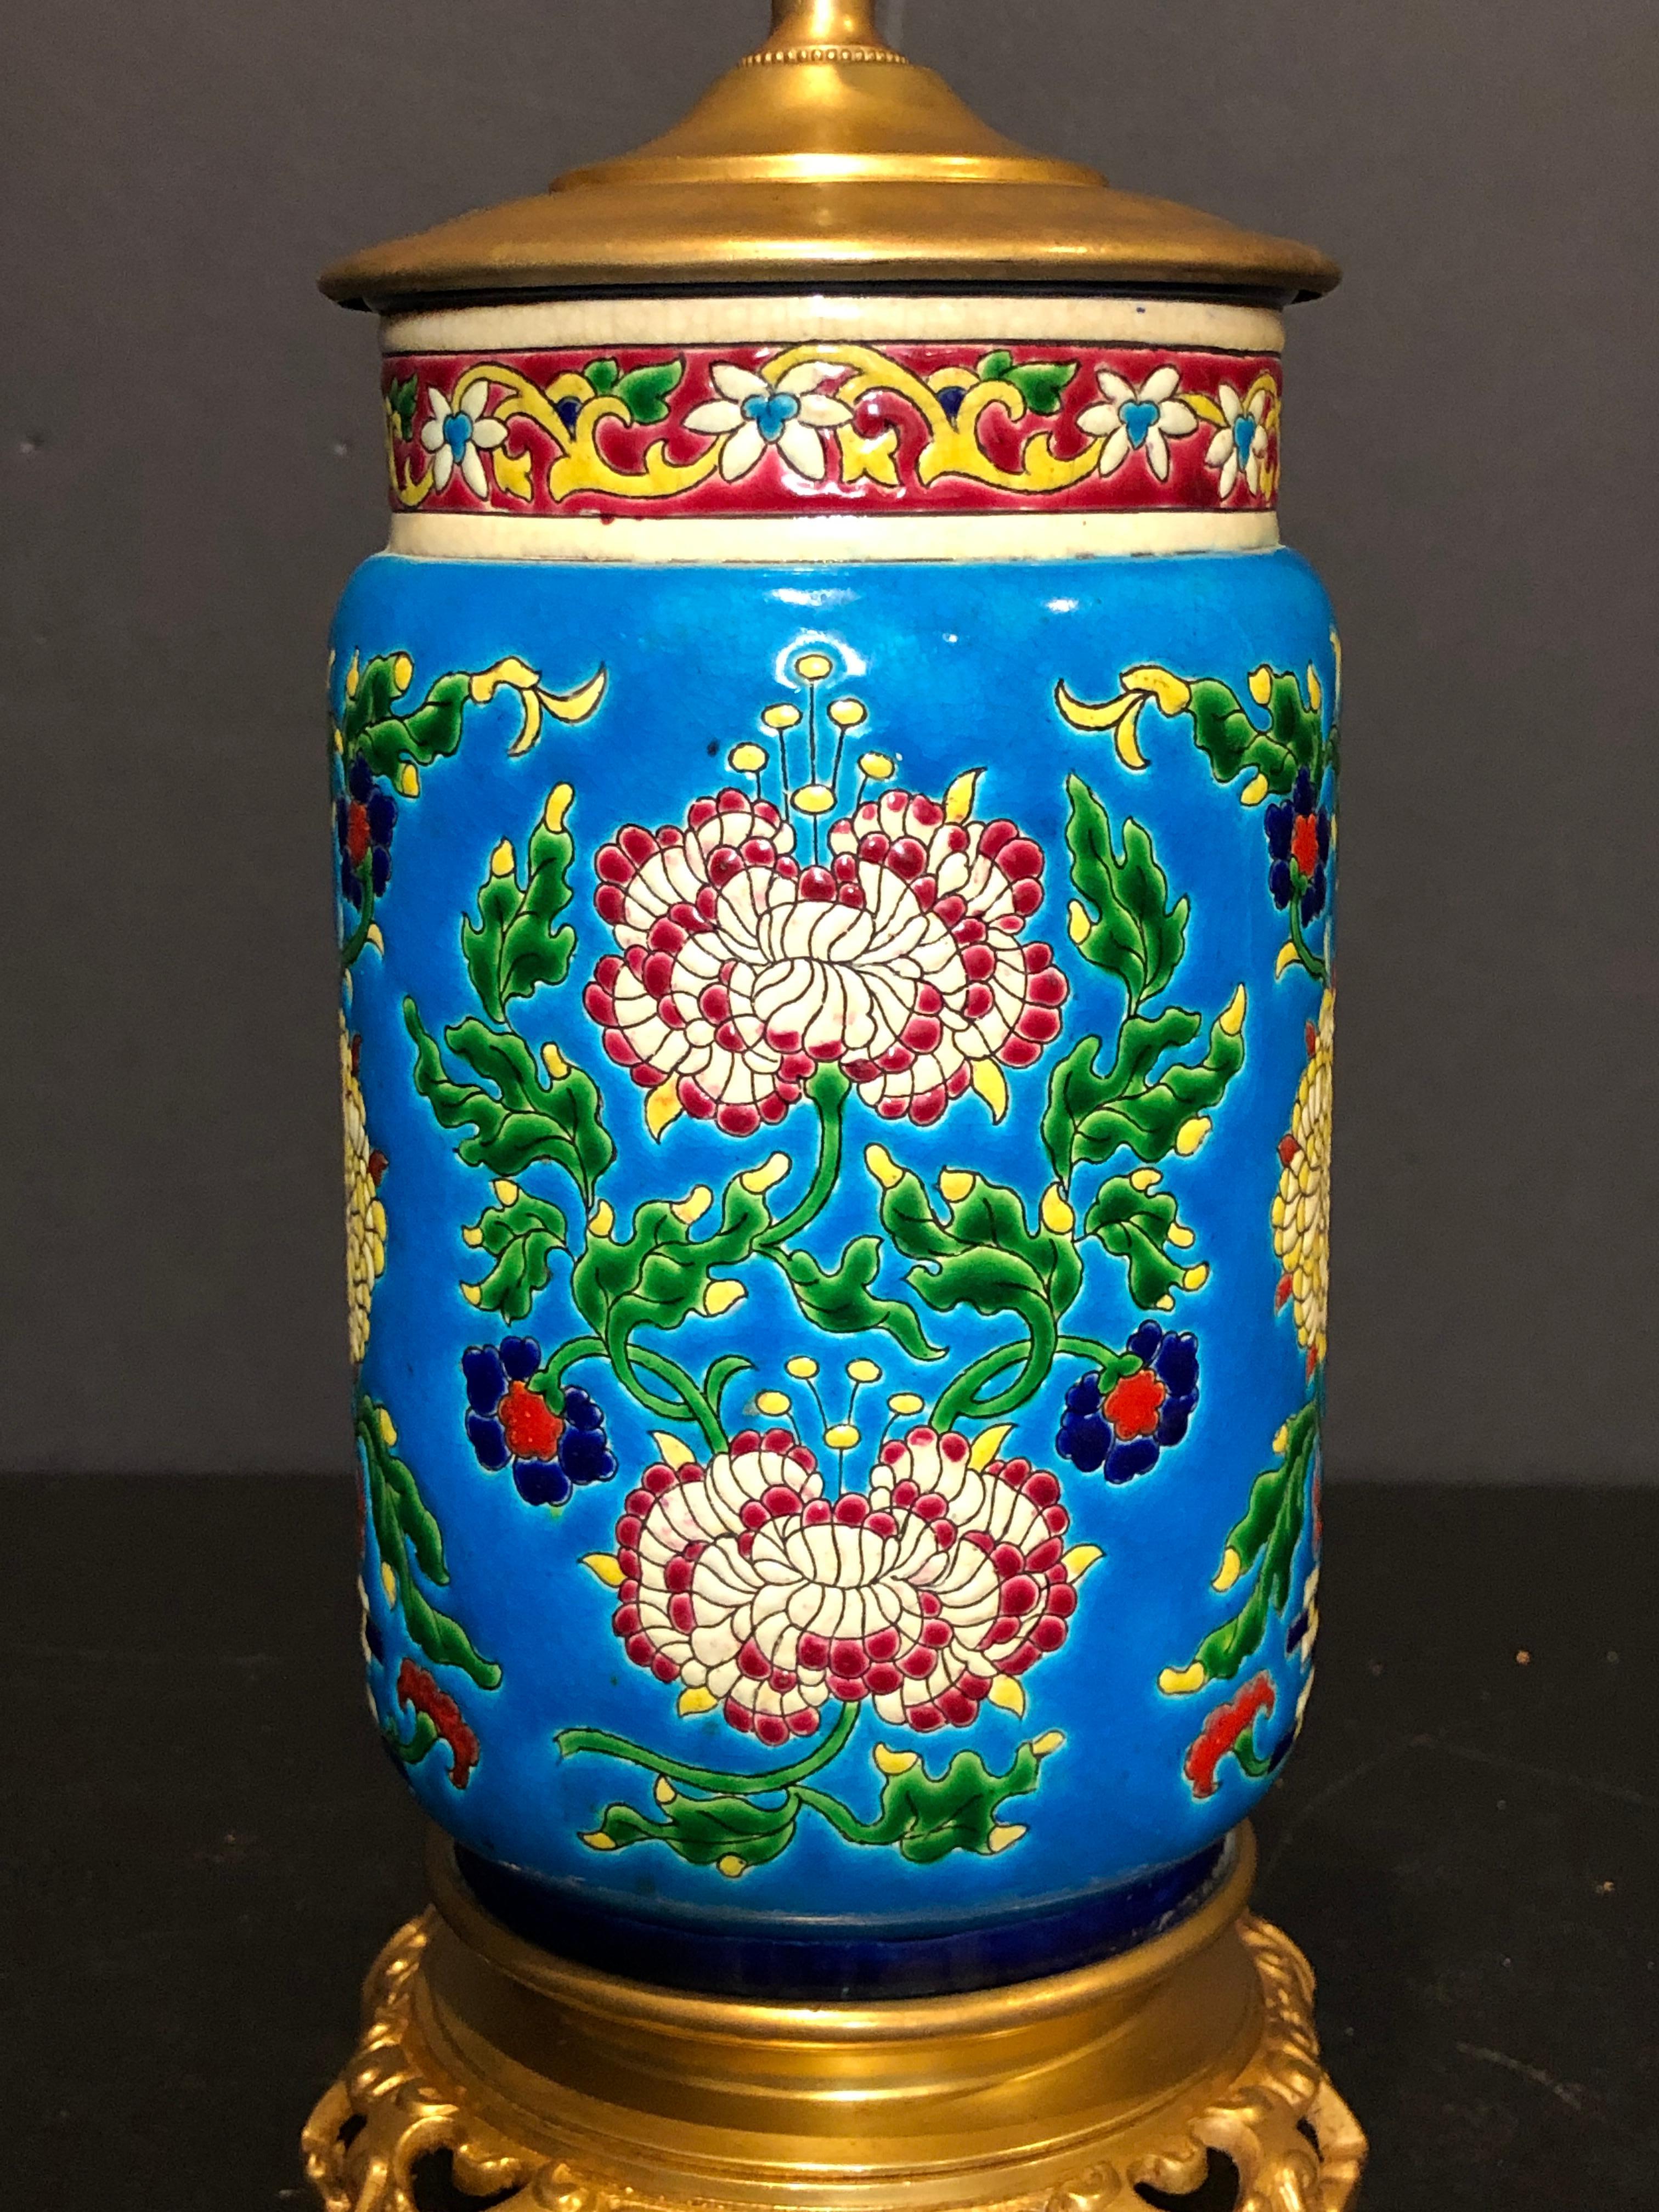 Longwy urn mounted as lamp. Colorful floral designs with chrysanthemum and geometric areas mounted on a gild bronze base with an Asian influence.
Measures: 11